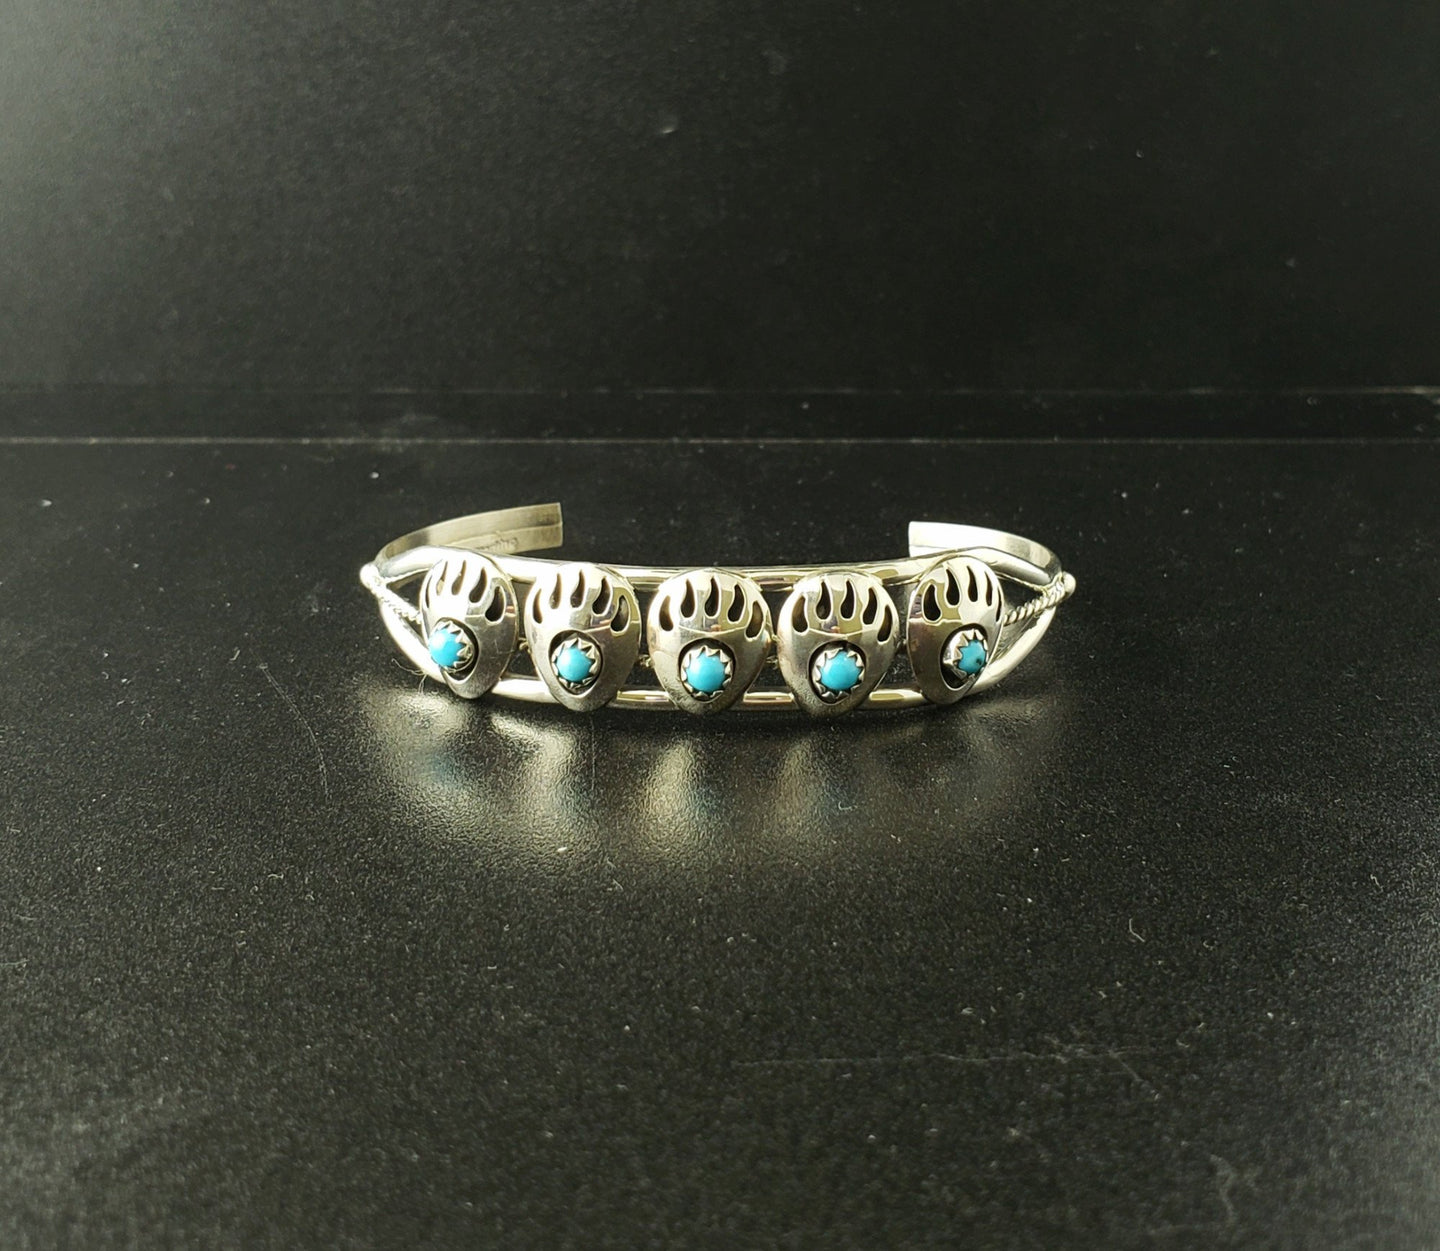 Bear Paw with turquoise dots sterling silver cuff bracelet